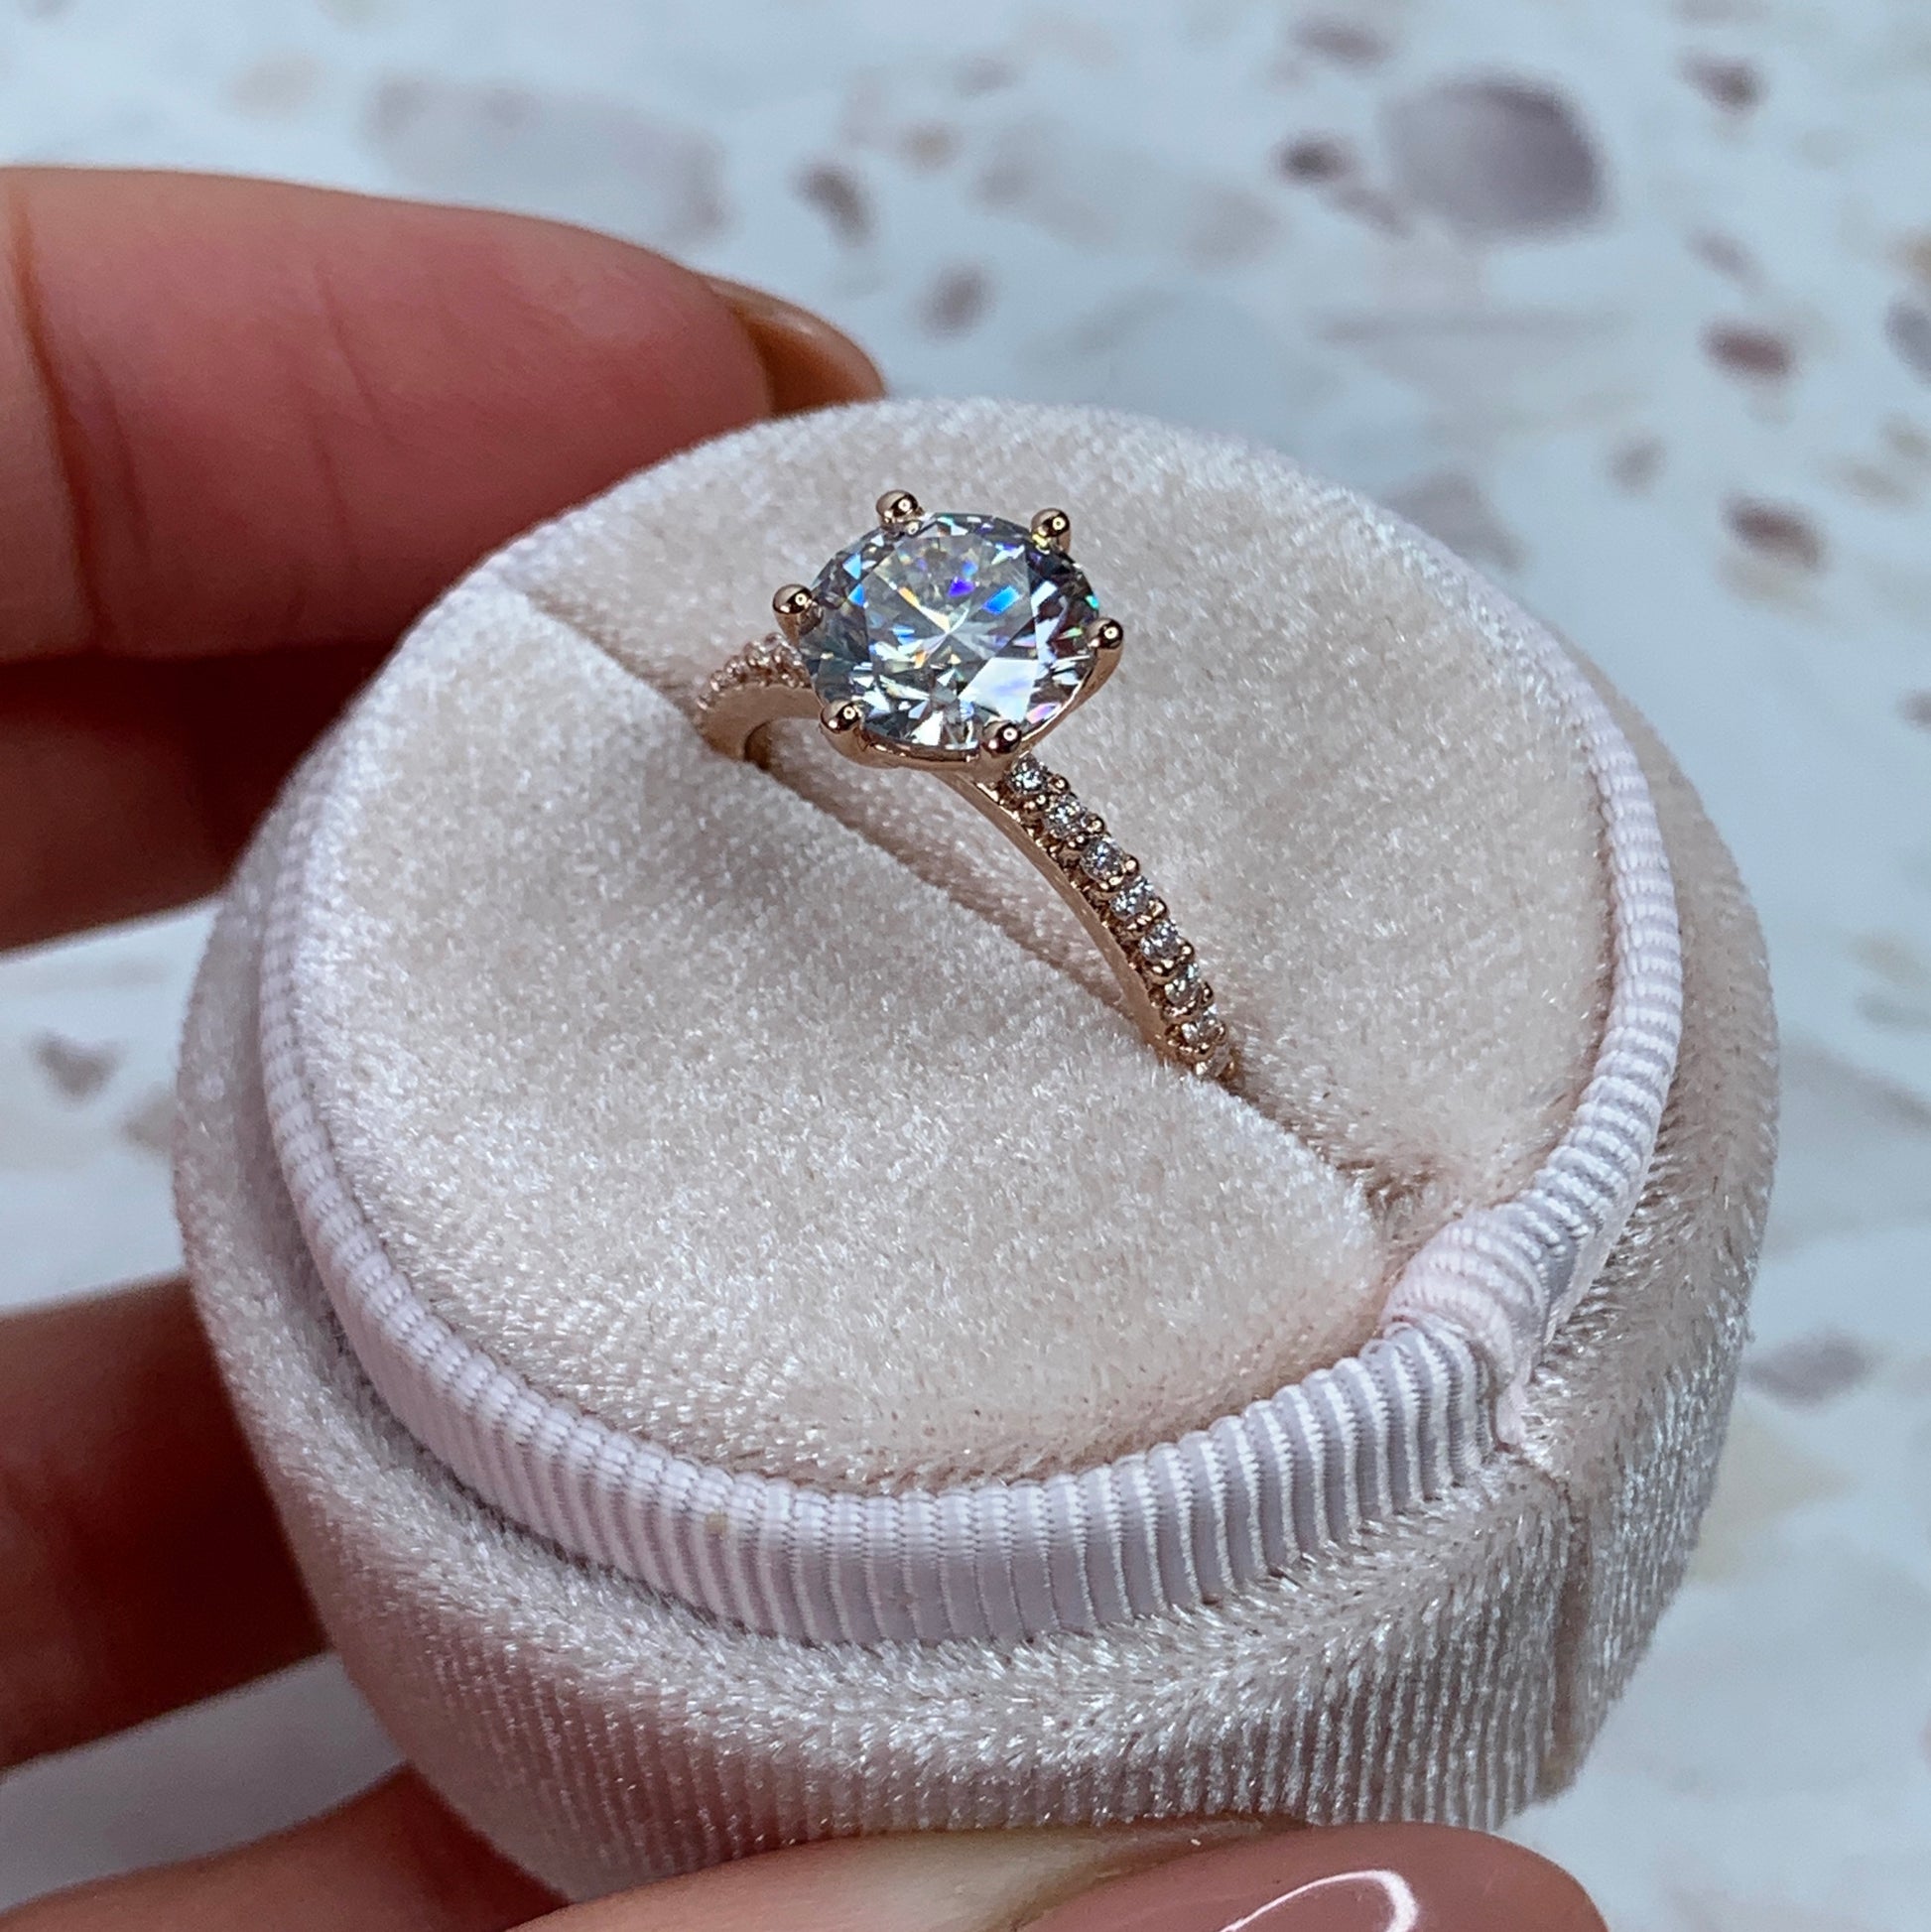 Round brilliant engagement ring with pavé-band